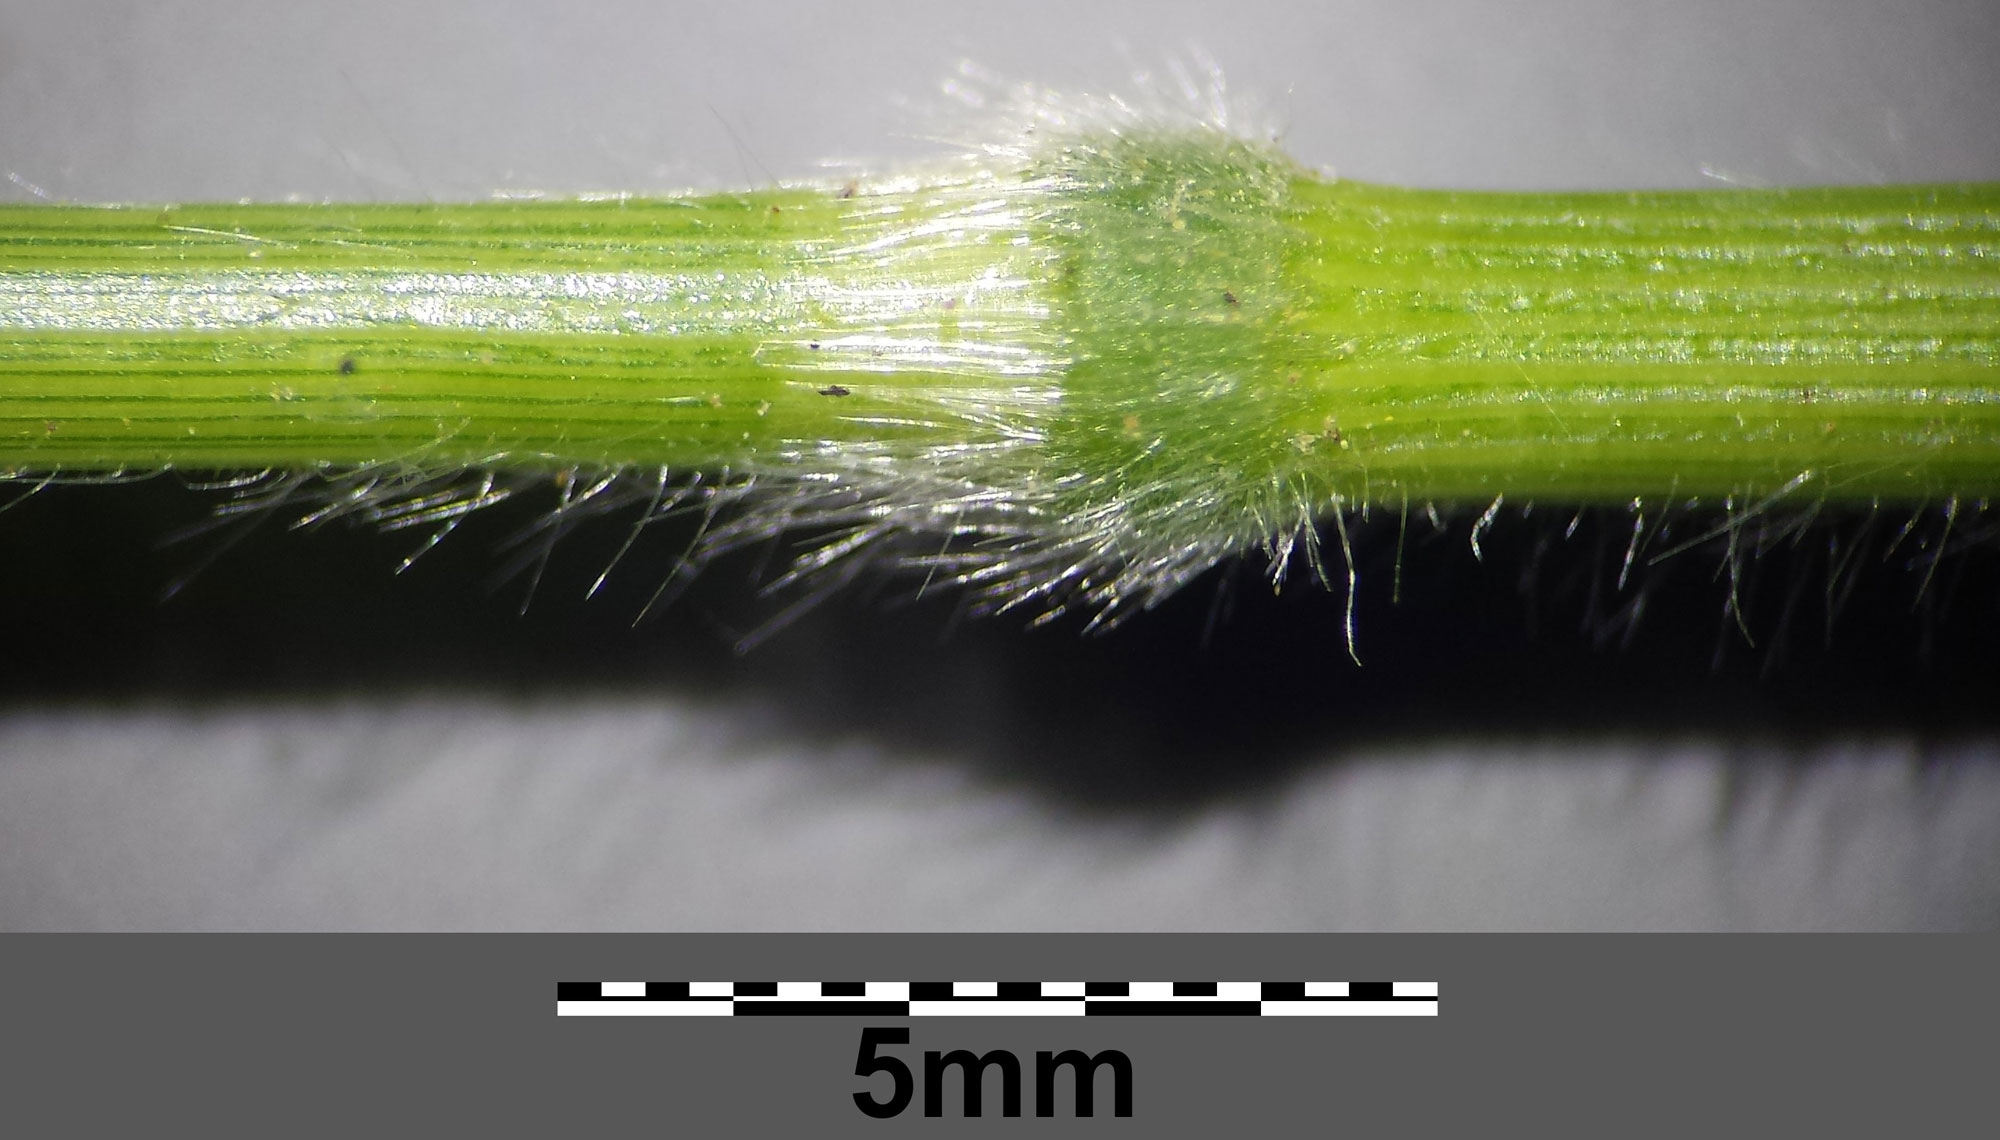 Photograph of the stem of false brome showing a swollen node. The stem is oriented horizontally, and the swollen node has prominent white hairs on it. 